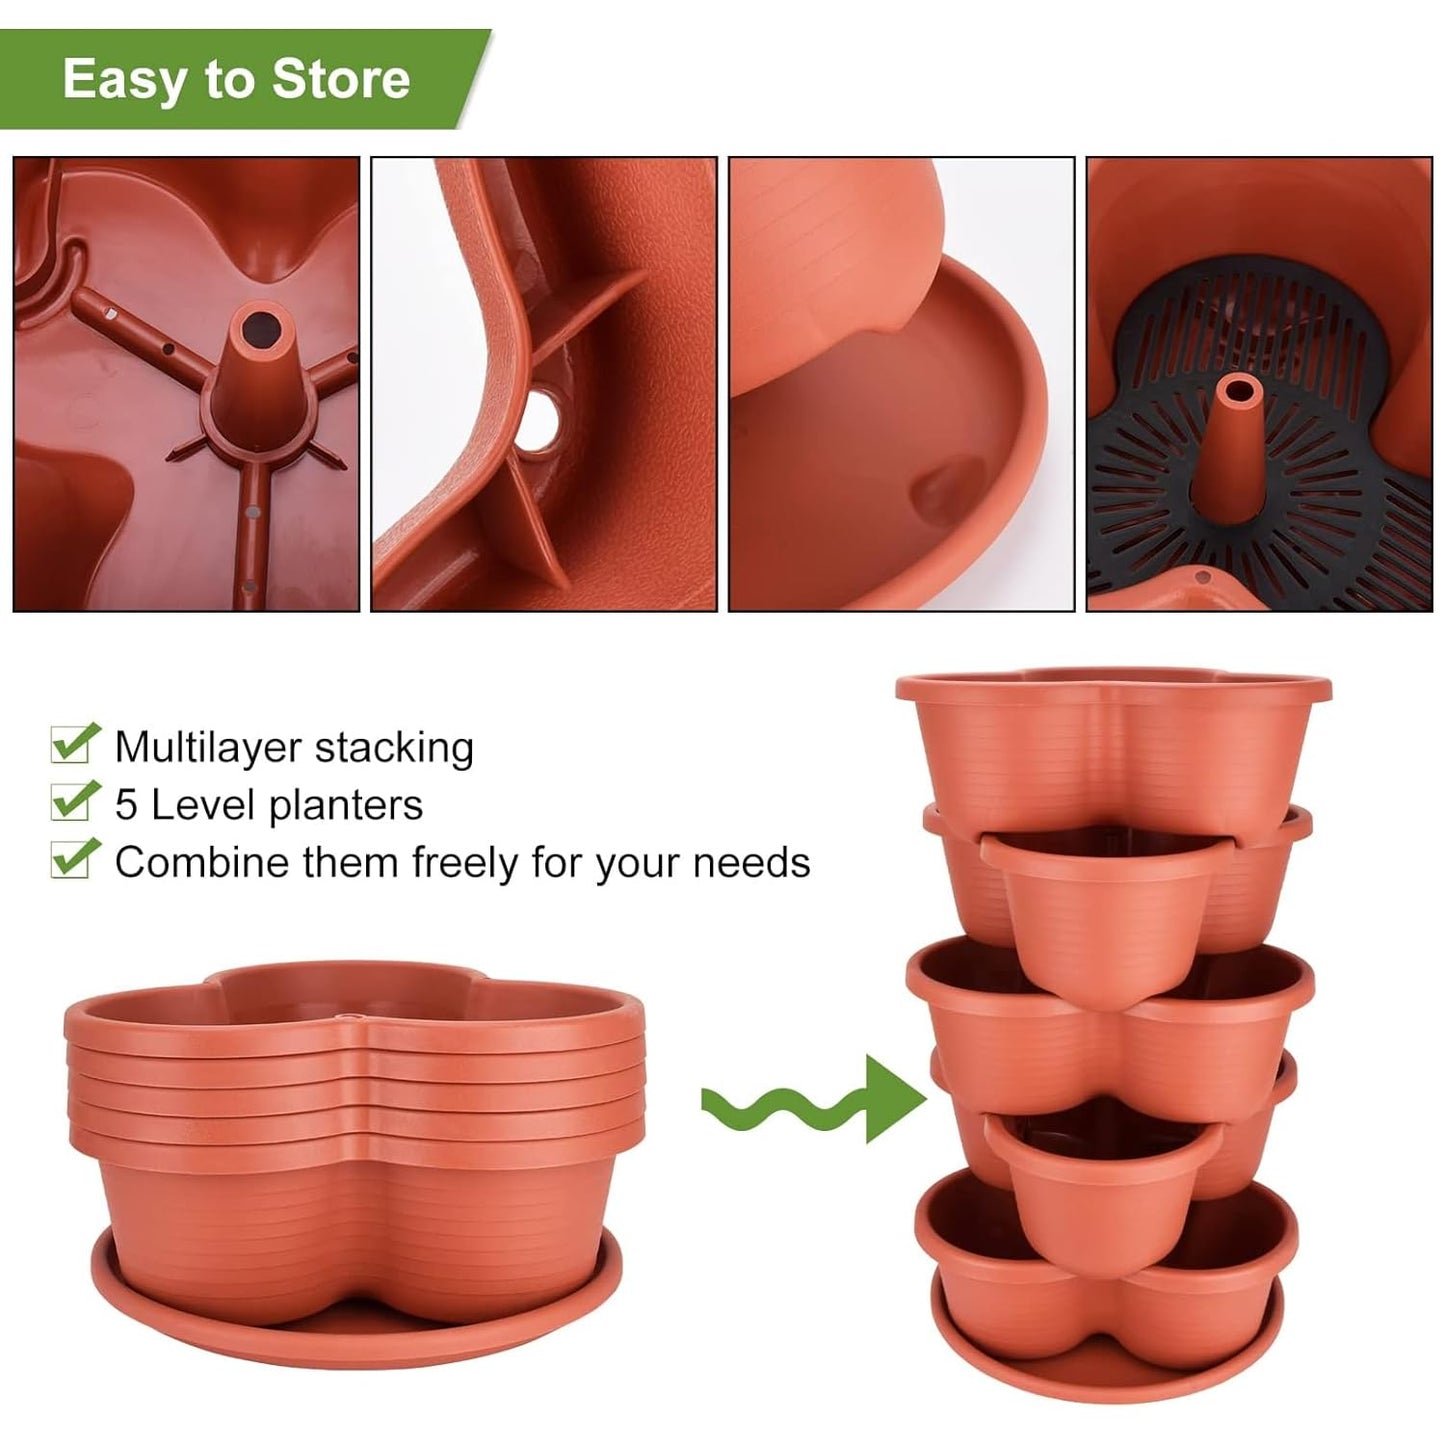 RooTrimmer 2-Pack Stackable Planter Pots, Brick Red, 5 Tier Garden Tower, Indoor/Outdoor Planters, Ideal for Growing Vegetables and Succulents